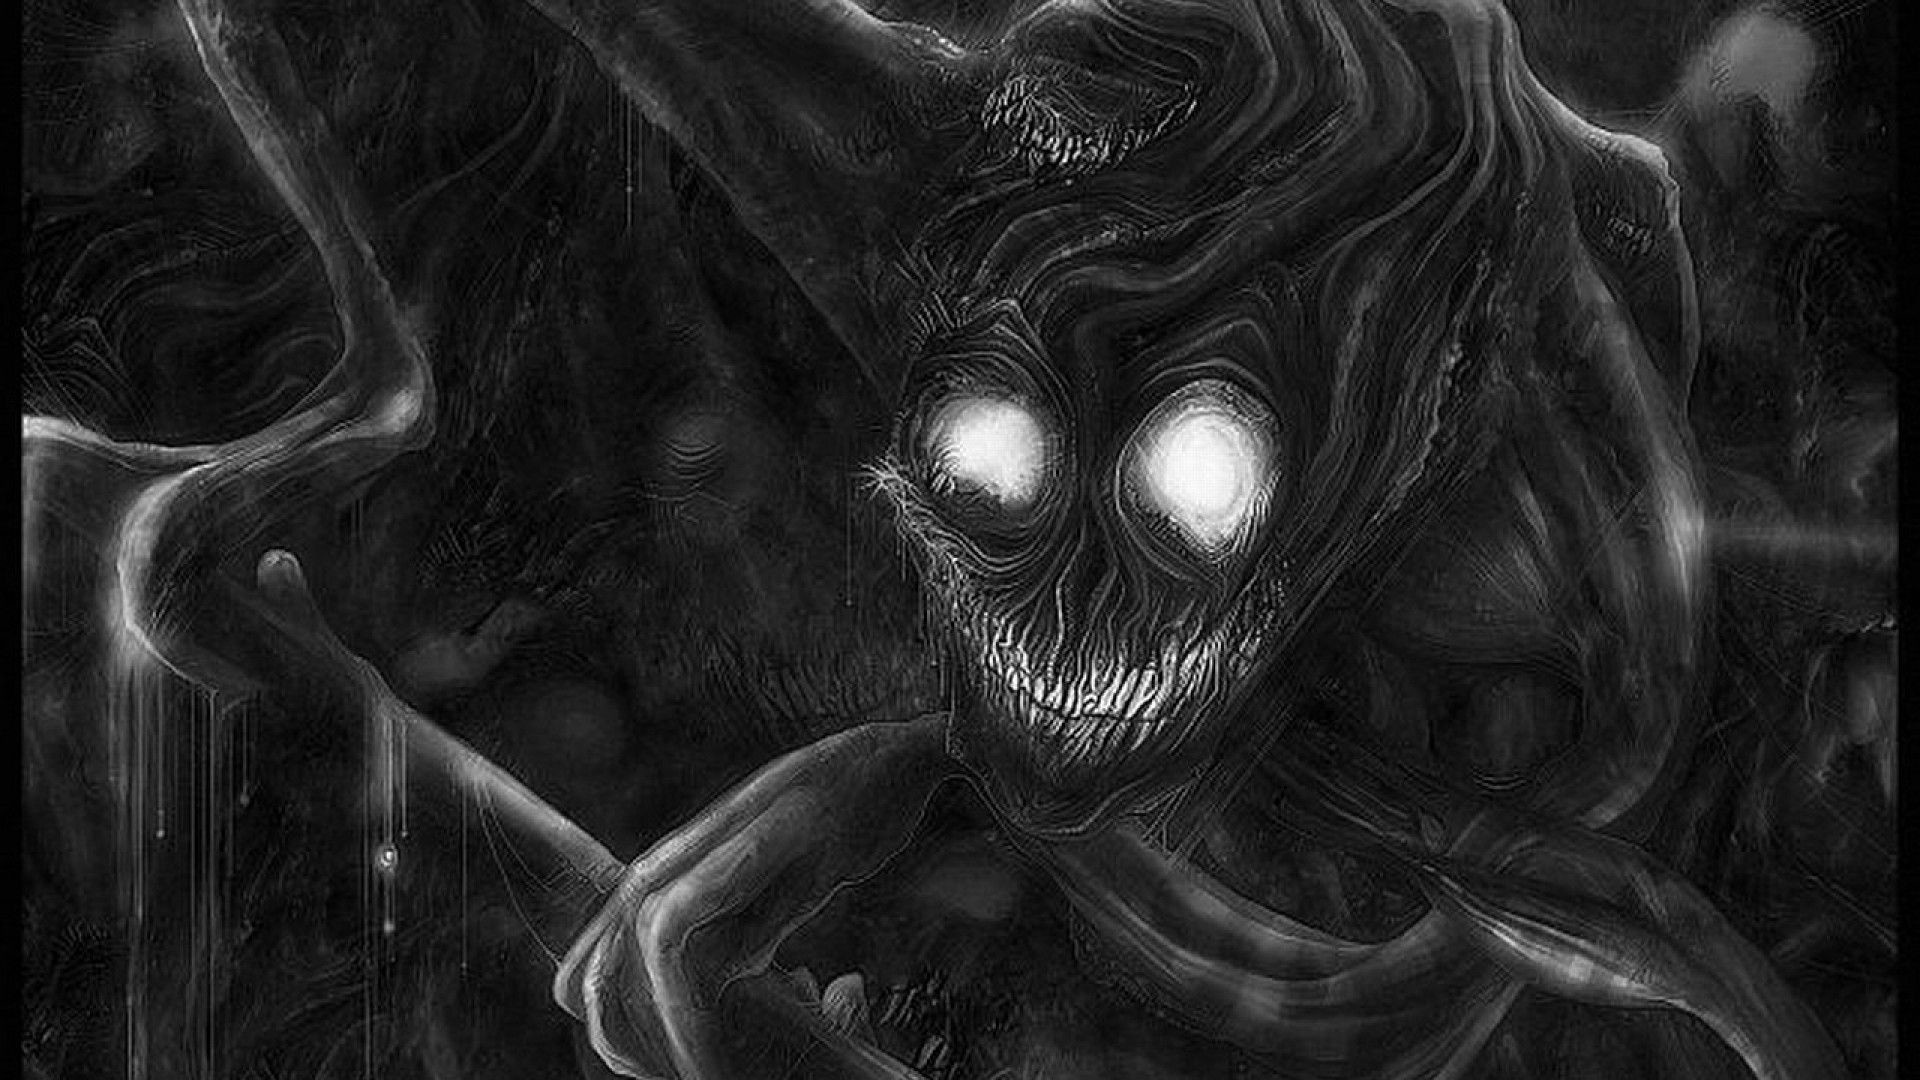 1920x1080 Scary Wallpapers, 43 Scary Images and Wallpapers for Mac, PC .